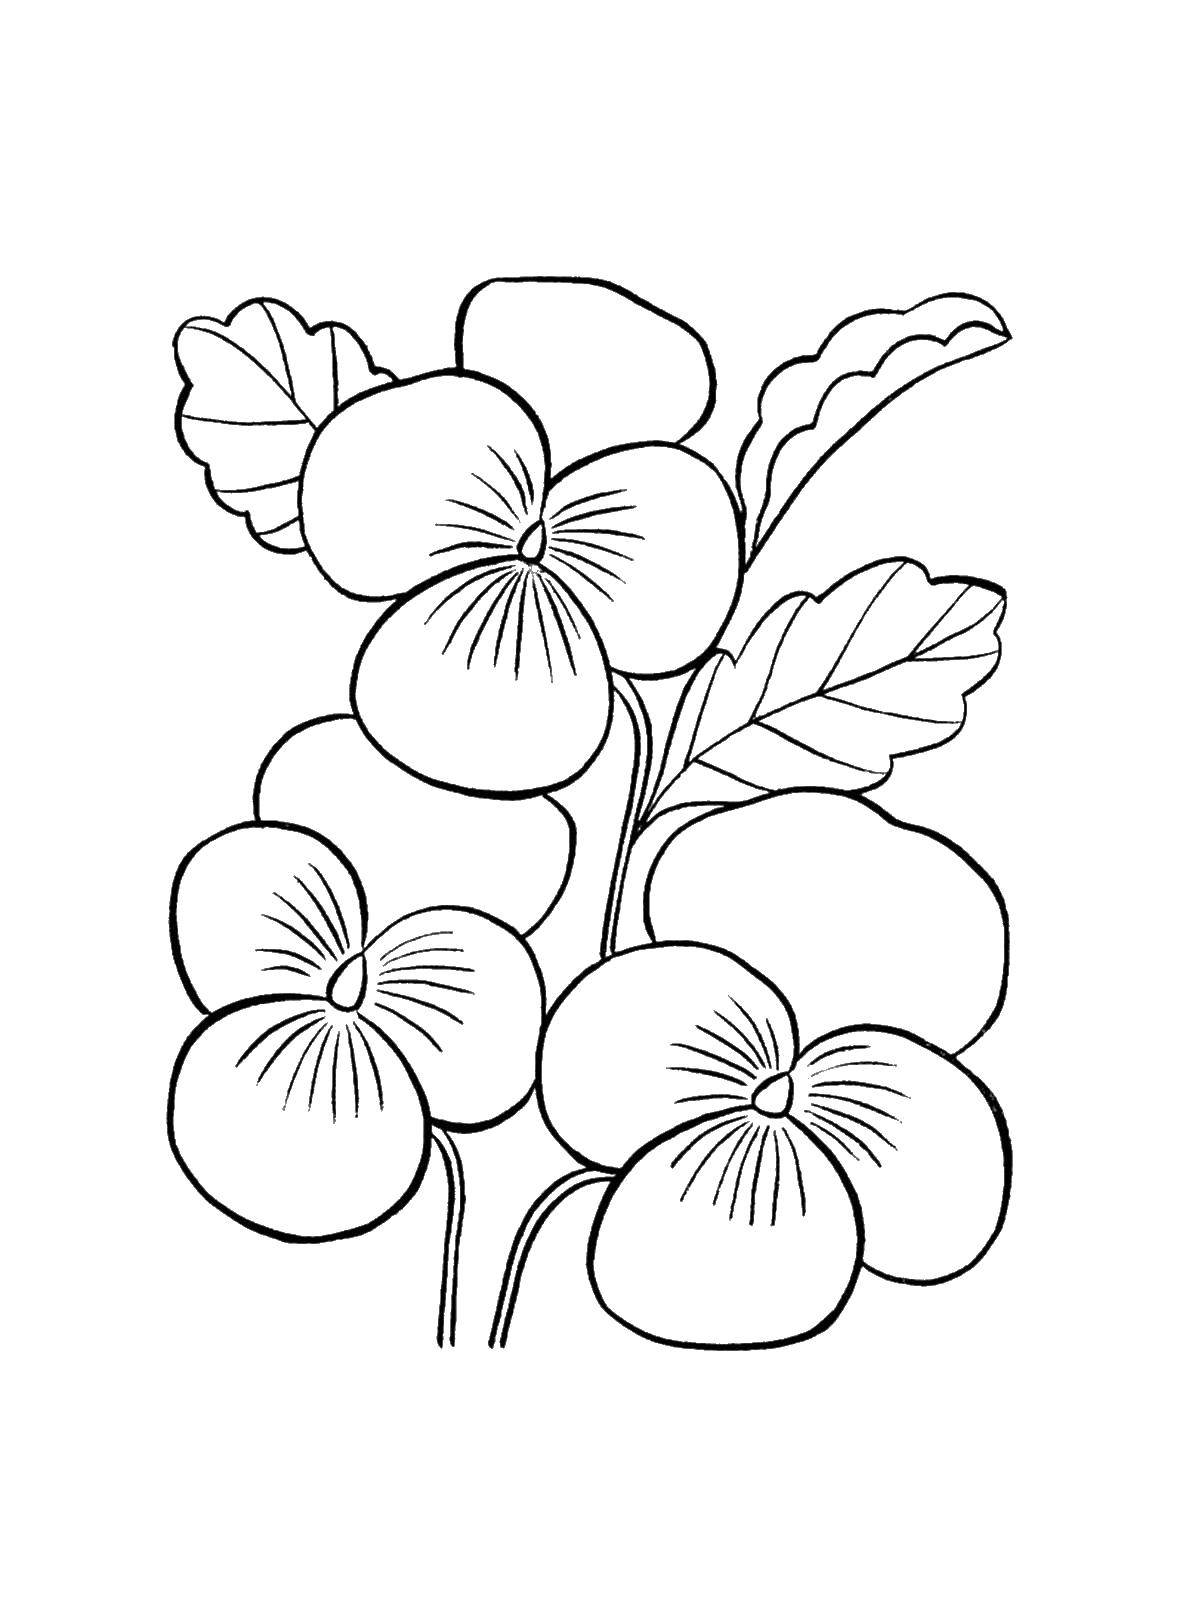 Online coloring pages Coloring Pansy , Coloring .